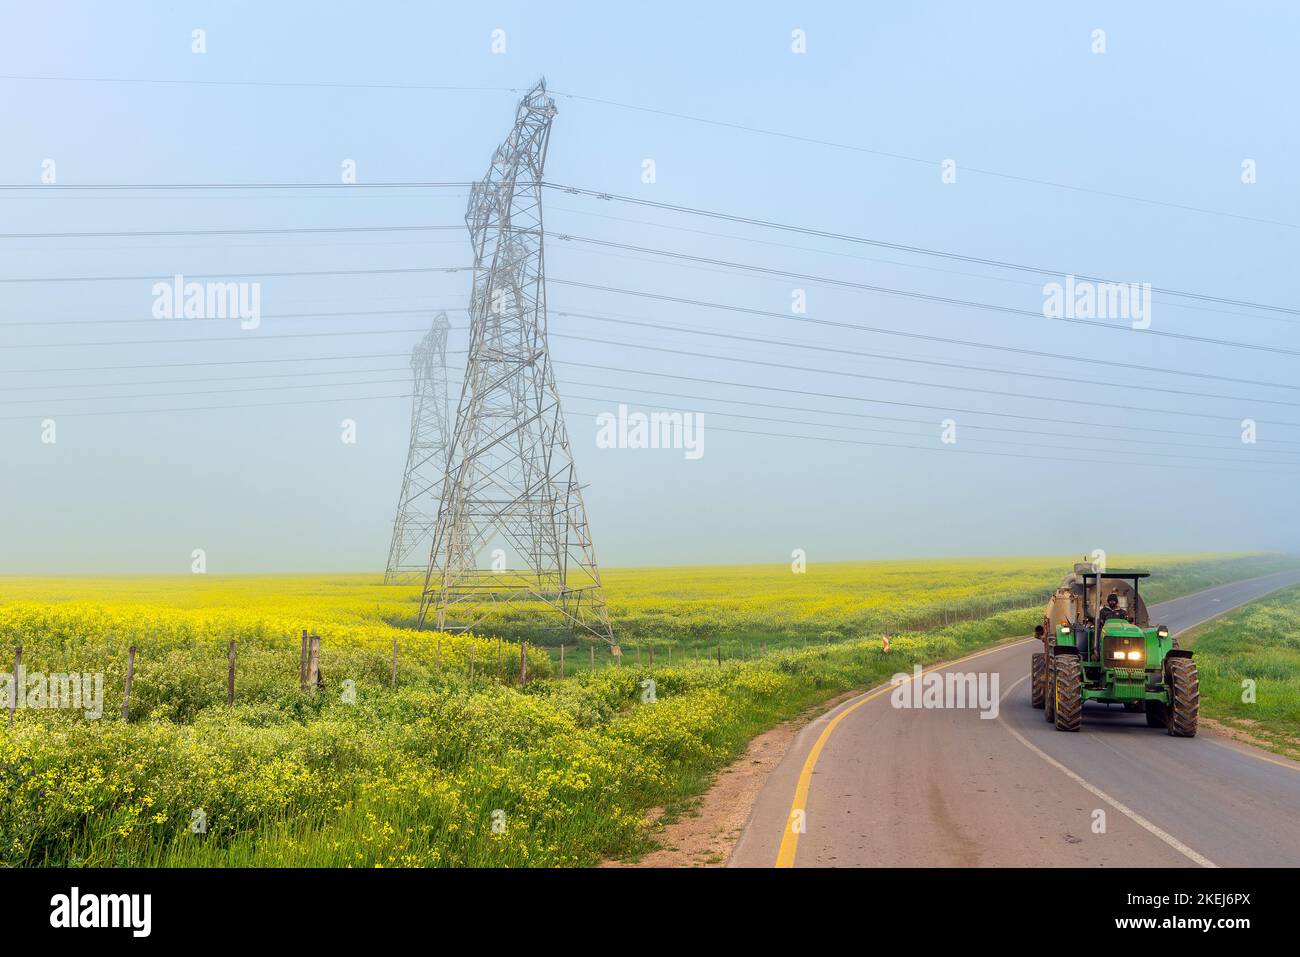 Durbanville, South Africa - Sep 16, 2022: A power transmission route, yellow canola fields and a tractor in fog along Malanshoogte Road near Durbanvil Stock Photo